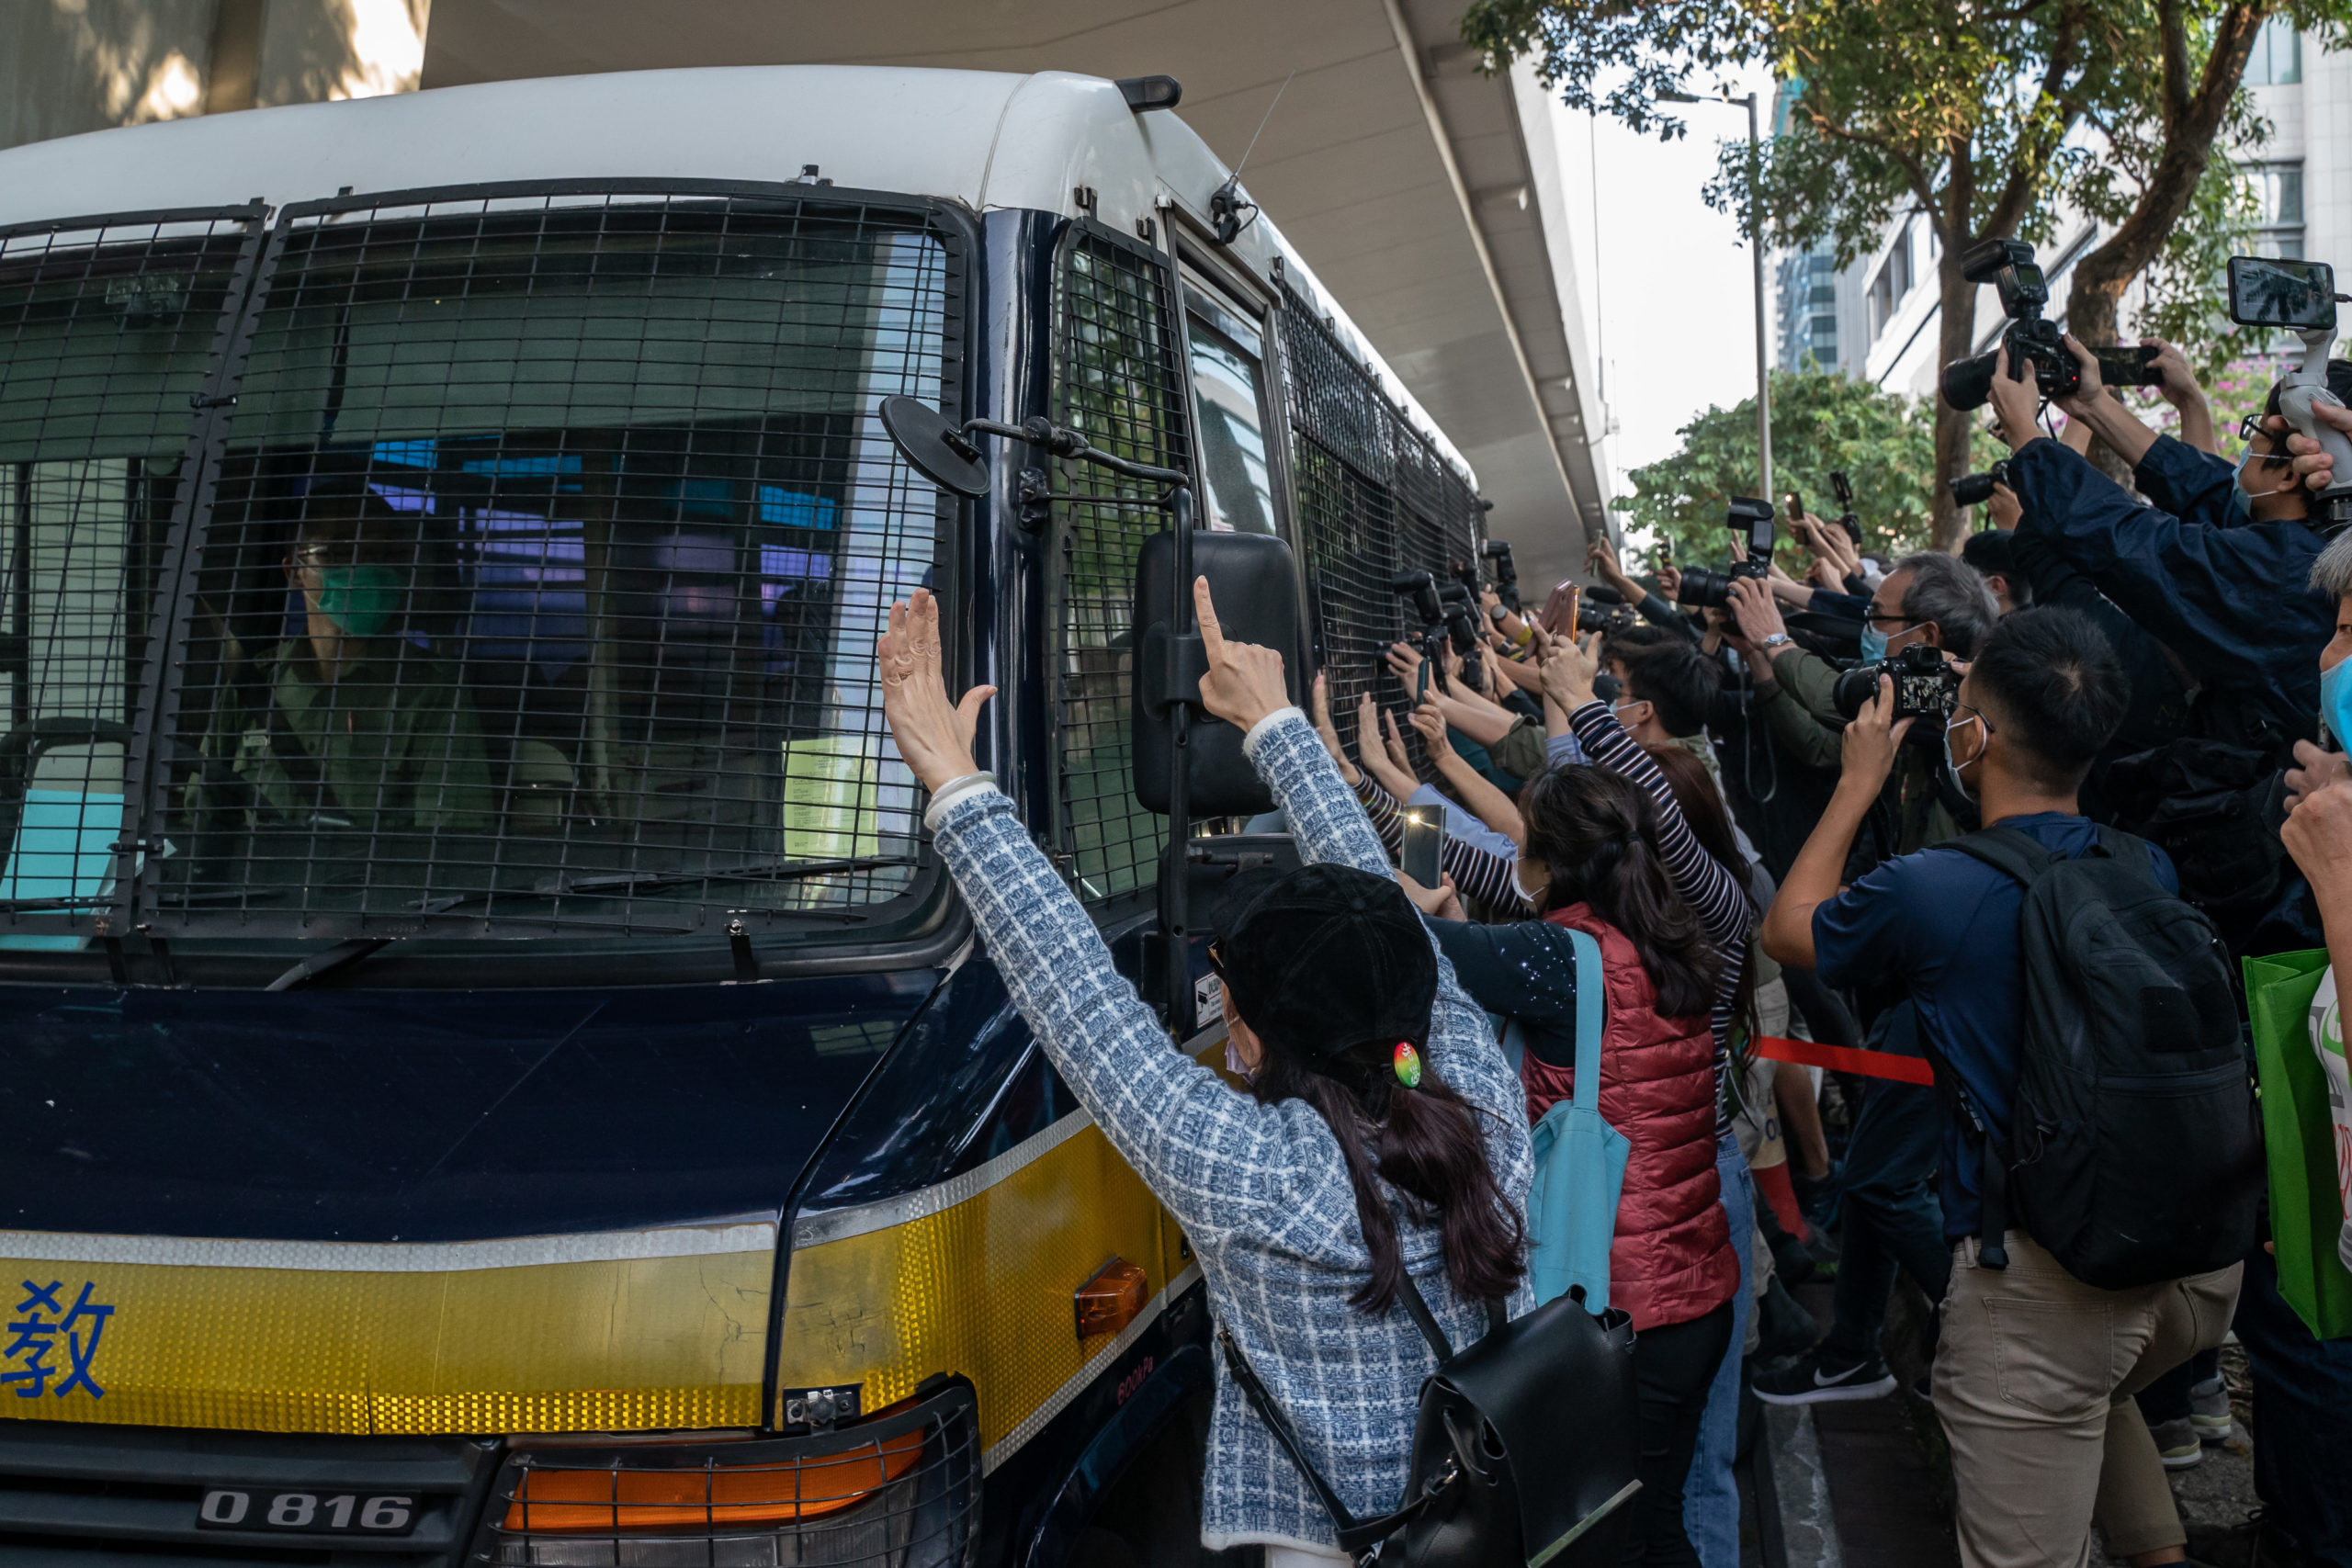 Supporters react as a Correctional Services Department vehicle leaves court after pro-democracy activists Joshua Wong, Agnes Chow and Ivan Lam were sentenced on Wednesday in Hong Kong. (Anthony Kwan/Getty Images)